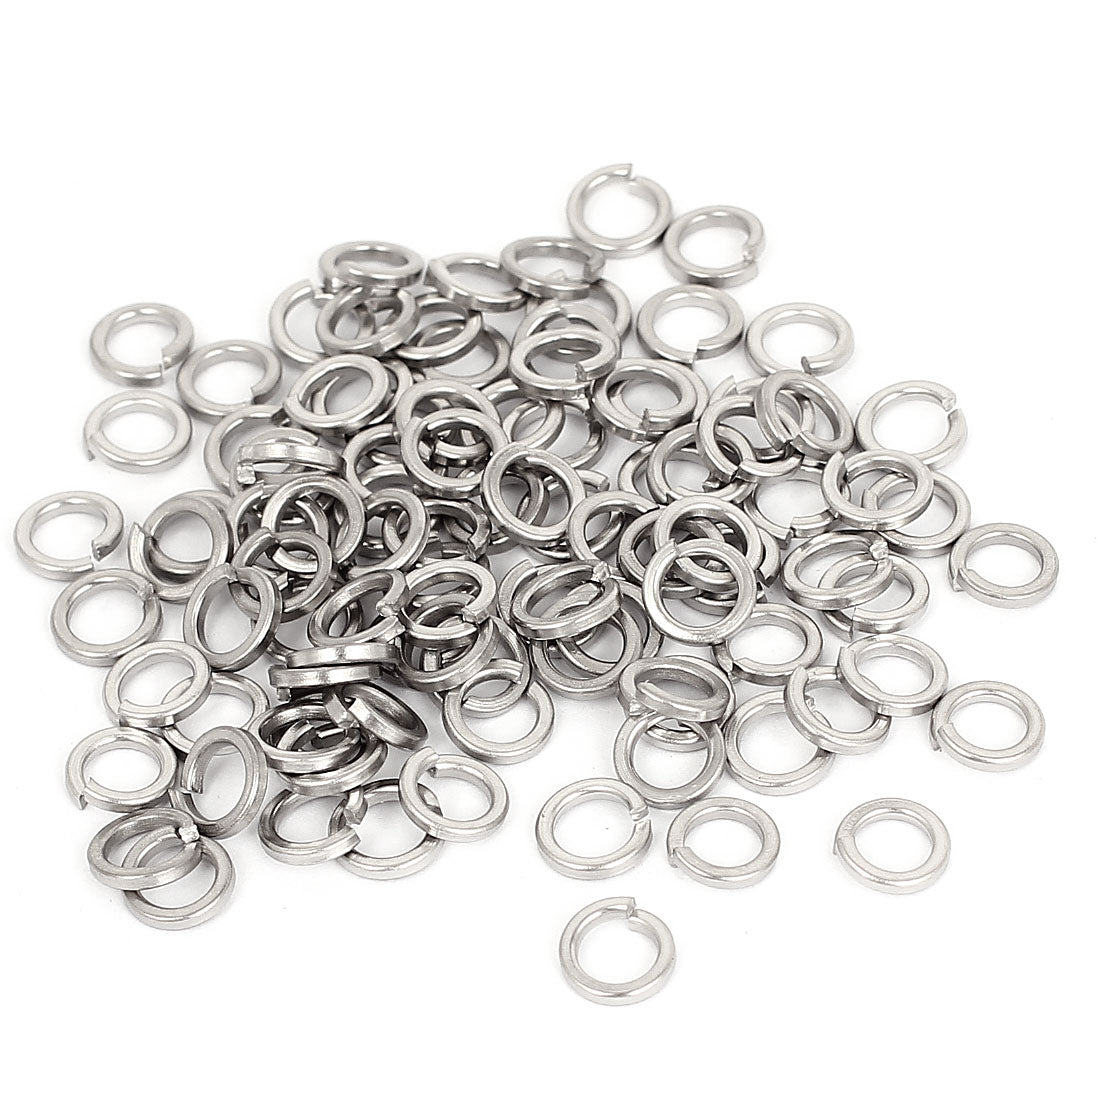 uxcell Uxcell 100pcs 304 Stainless Steel Split Lock Spring Washers M5 Screw Gasket Pad